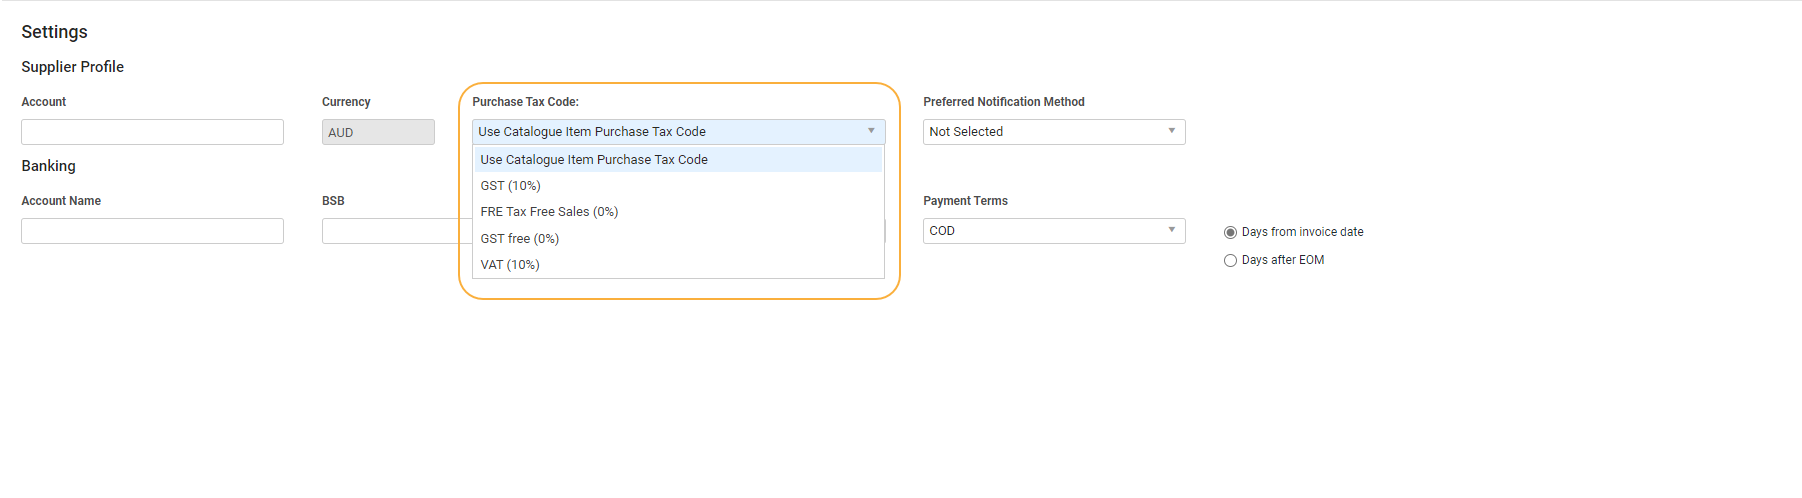 A screenshot of the Purchase Tax Code drop-down in a supplier.